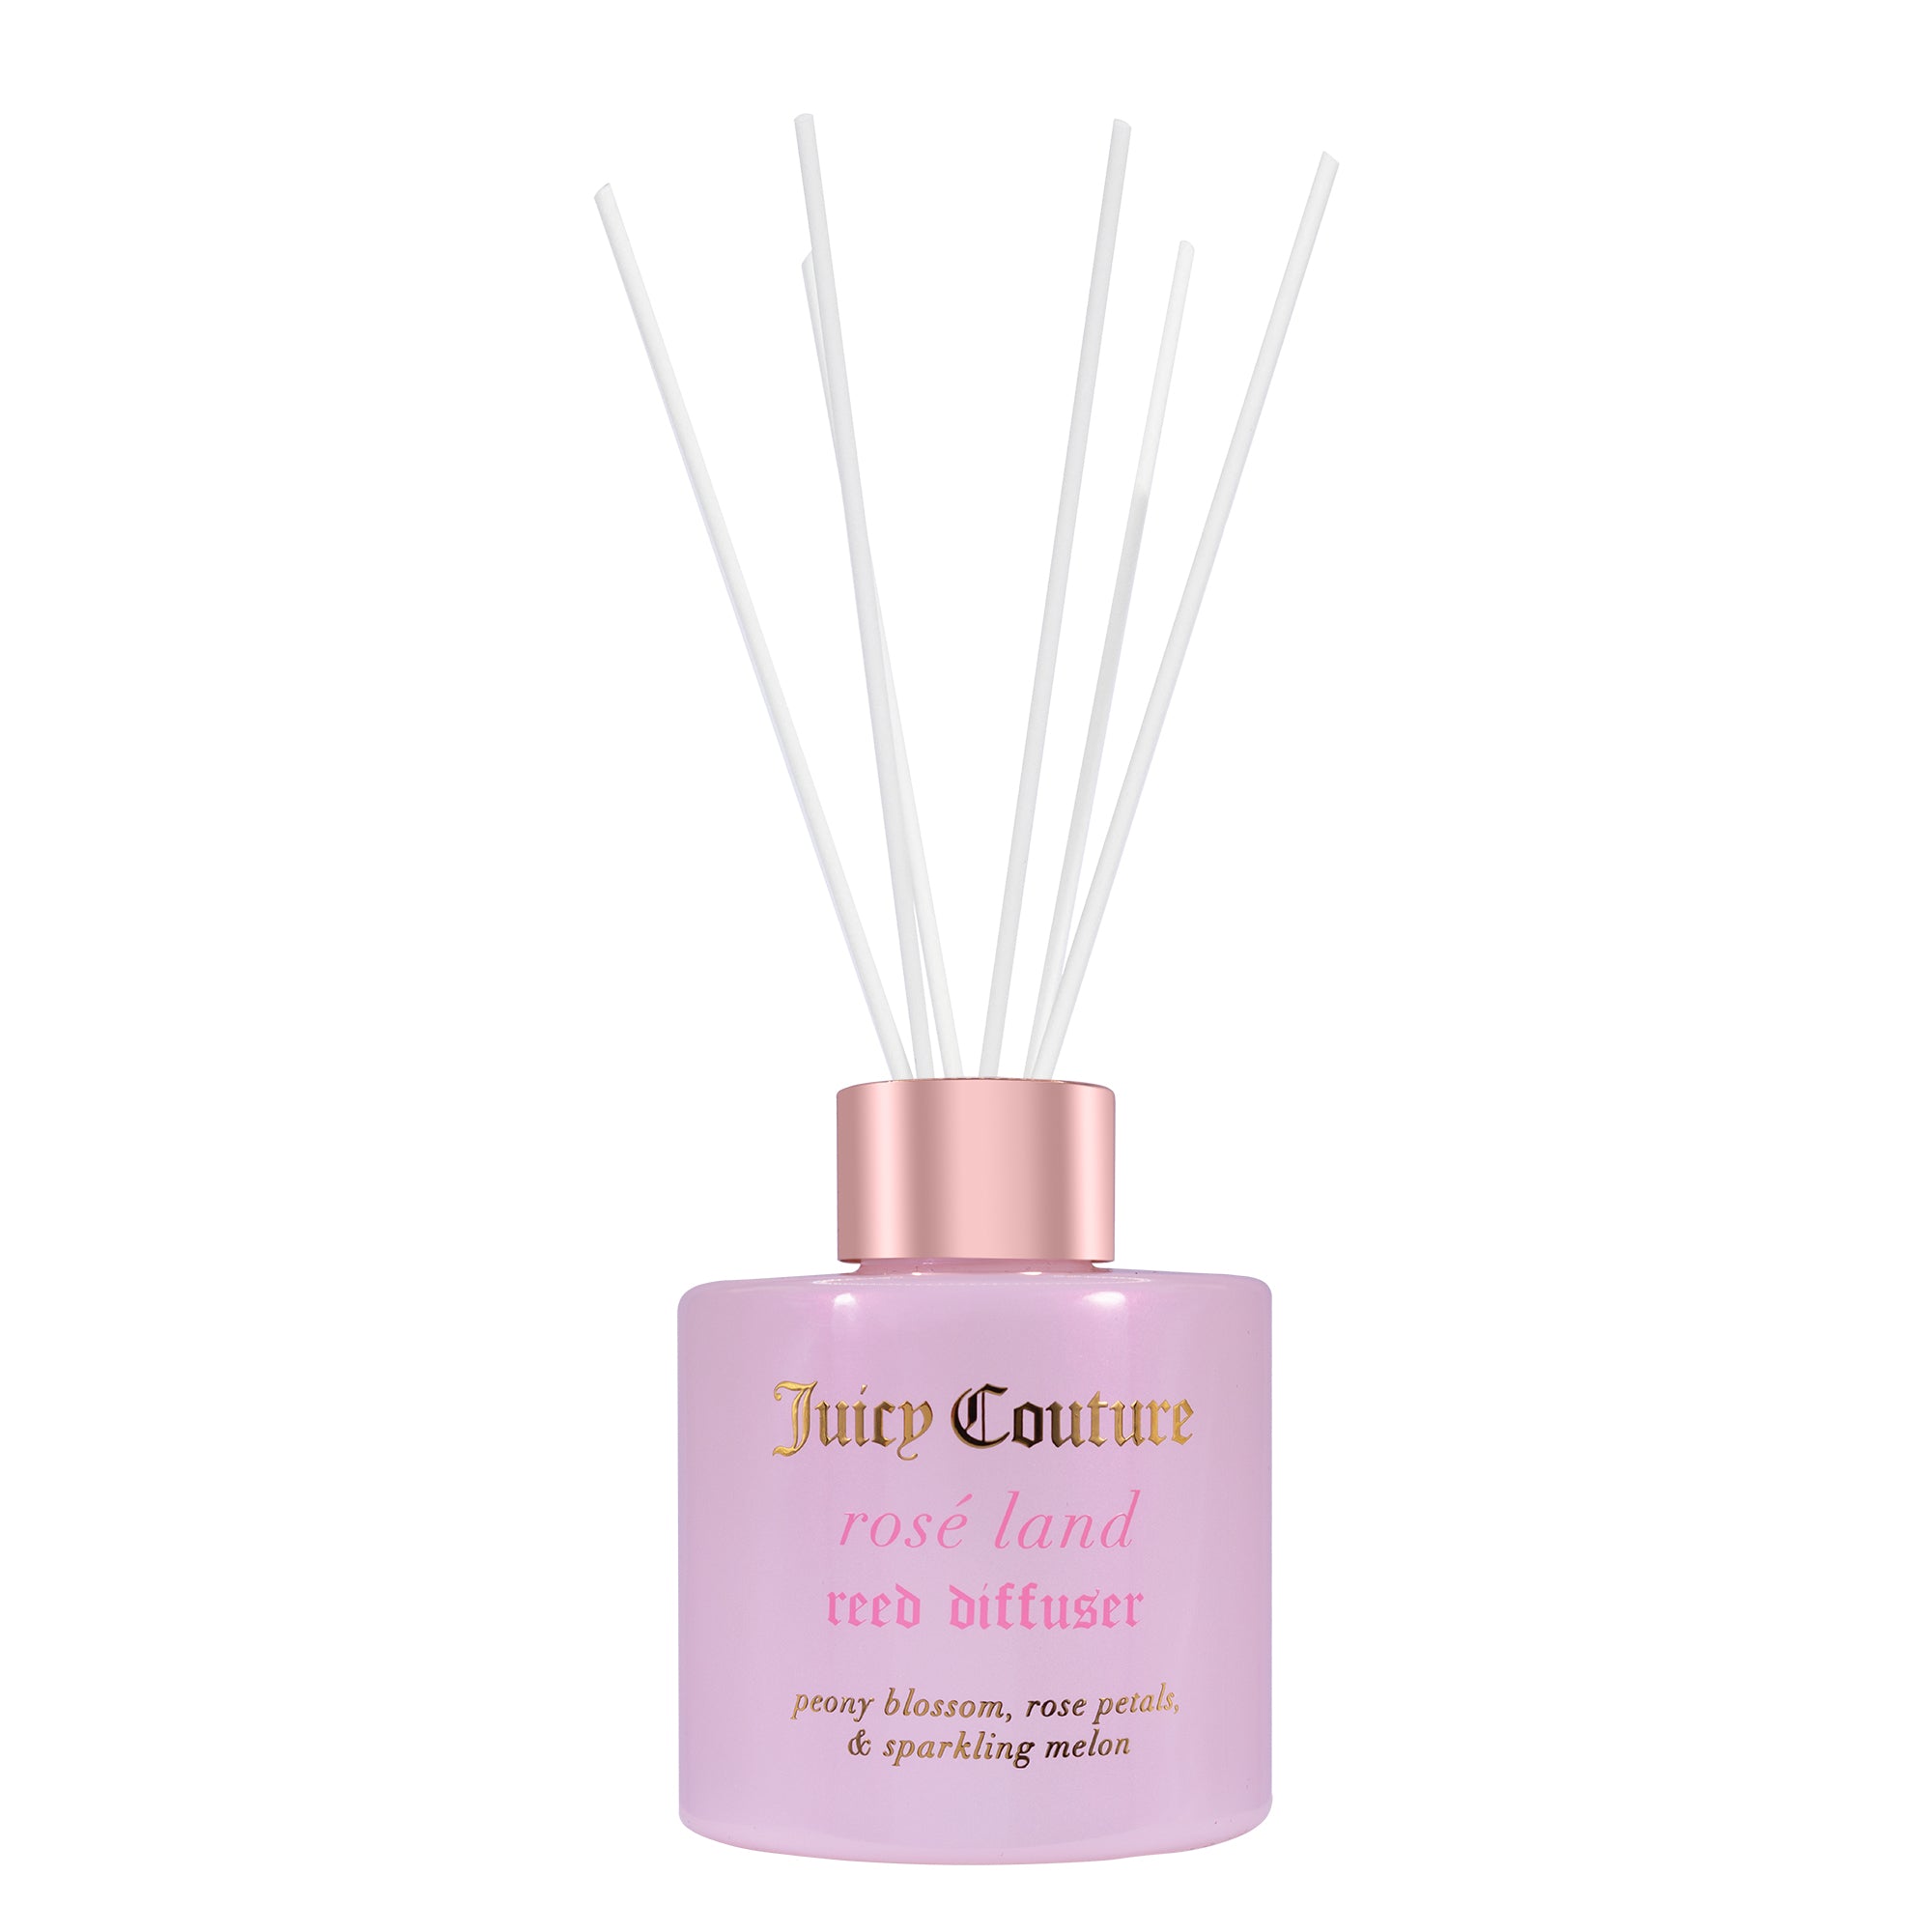 Rosé Land Reed Diffuser